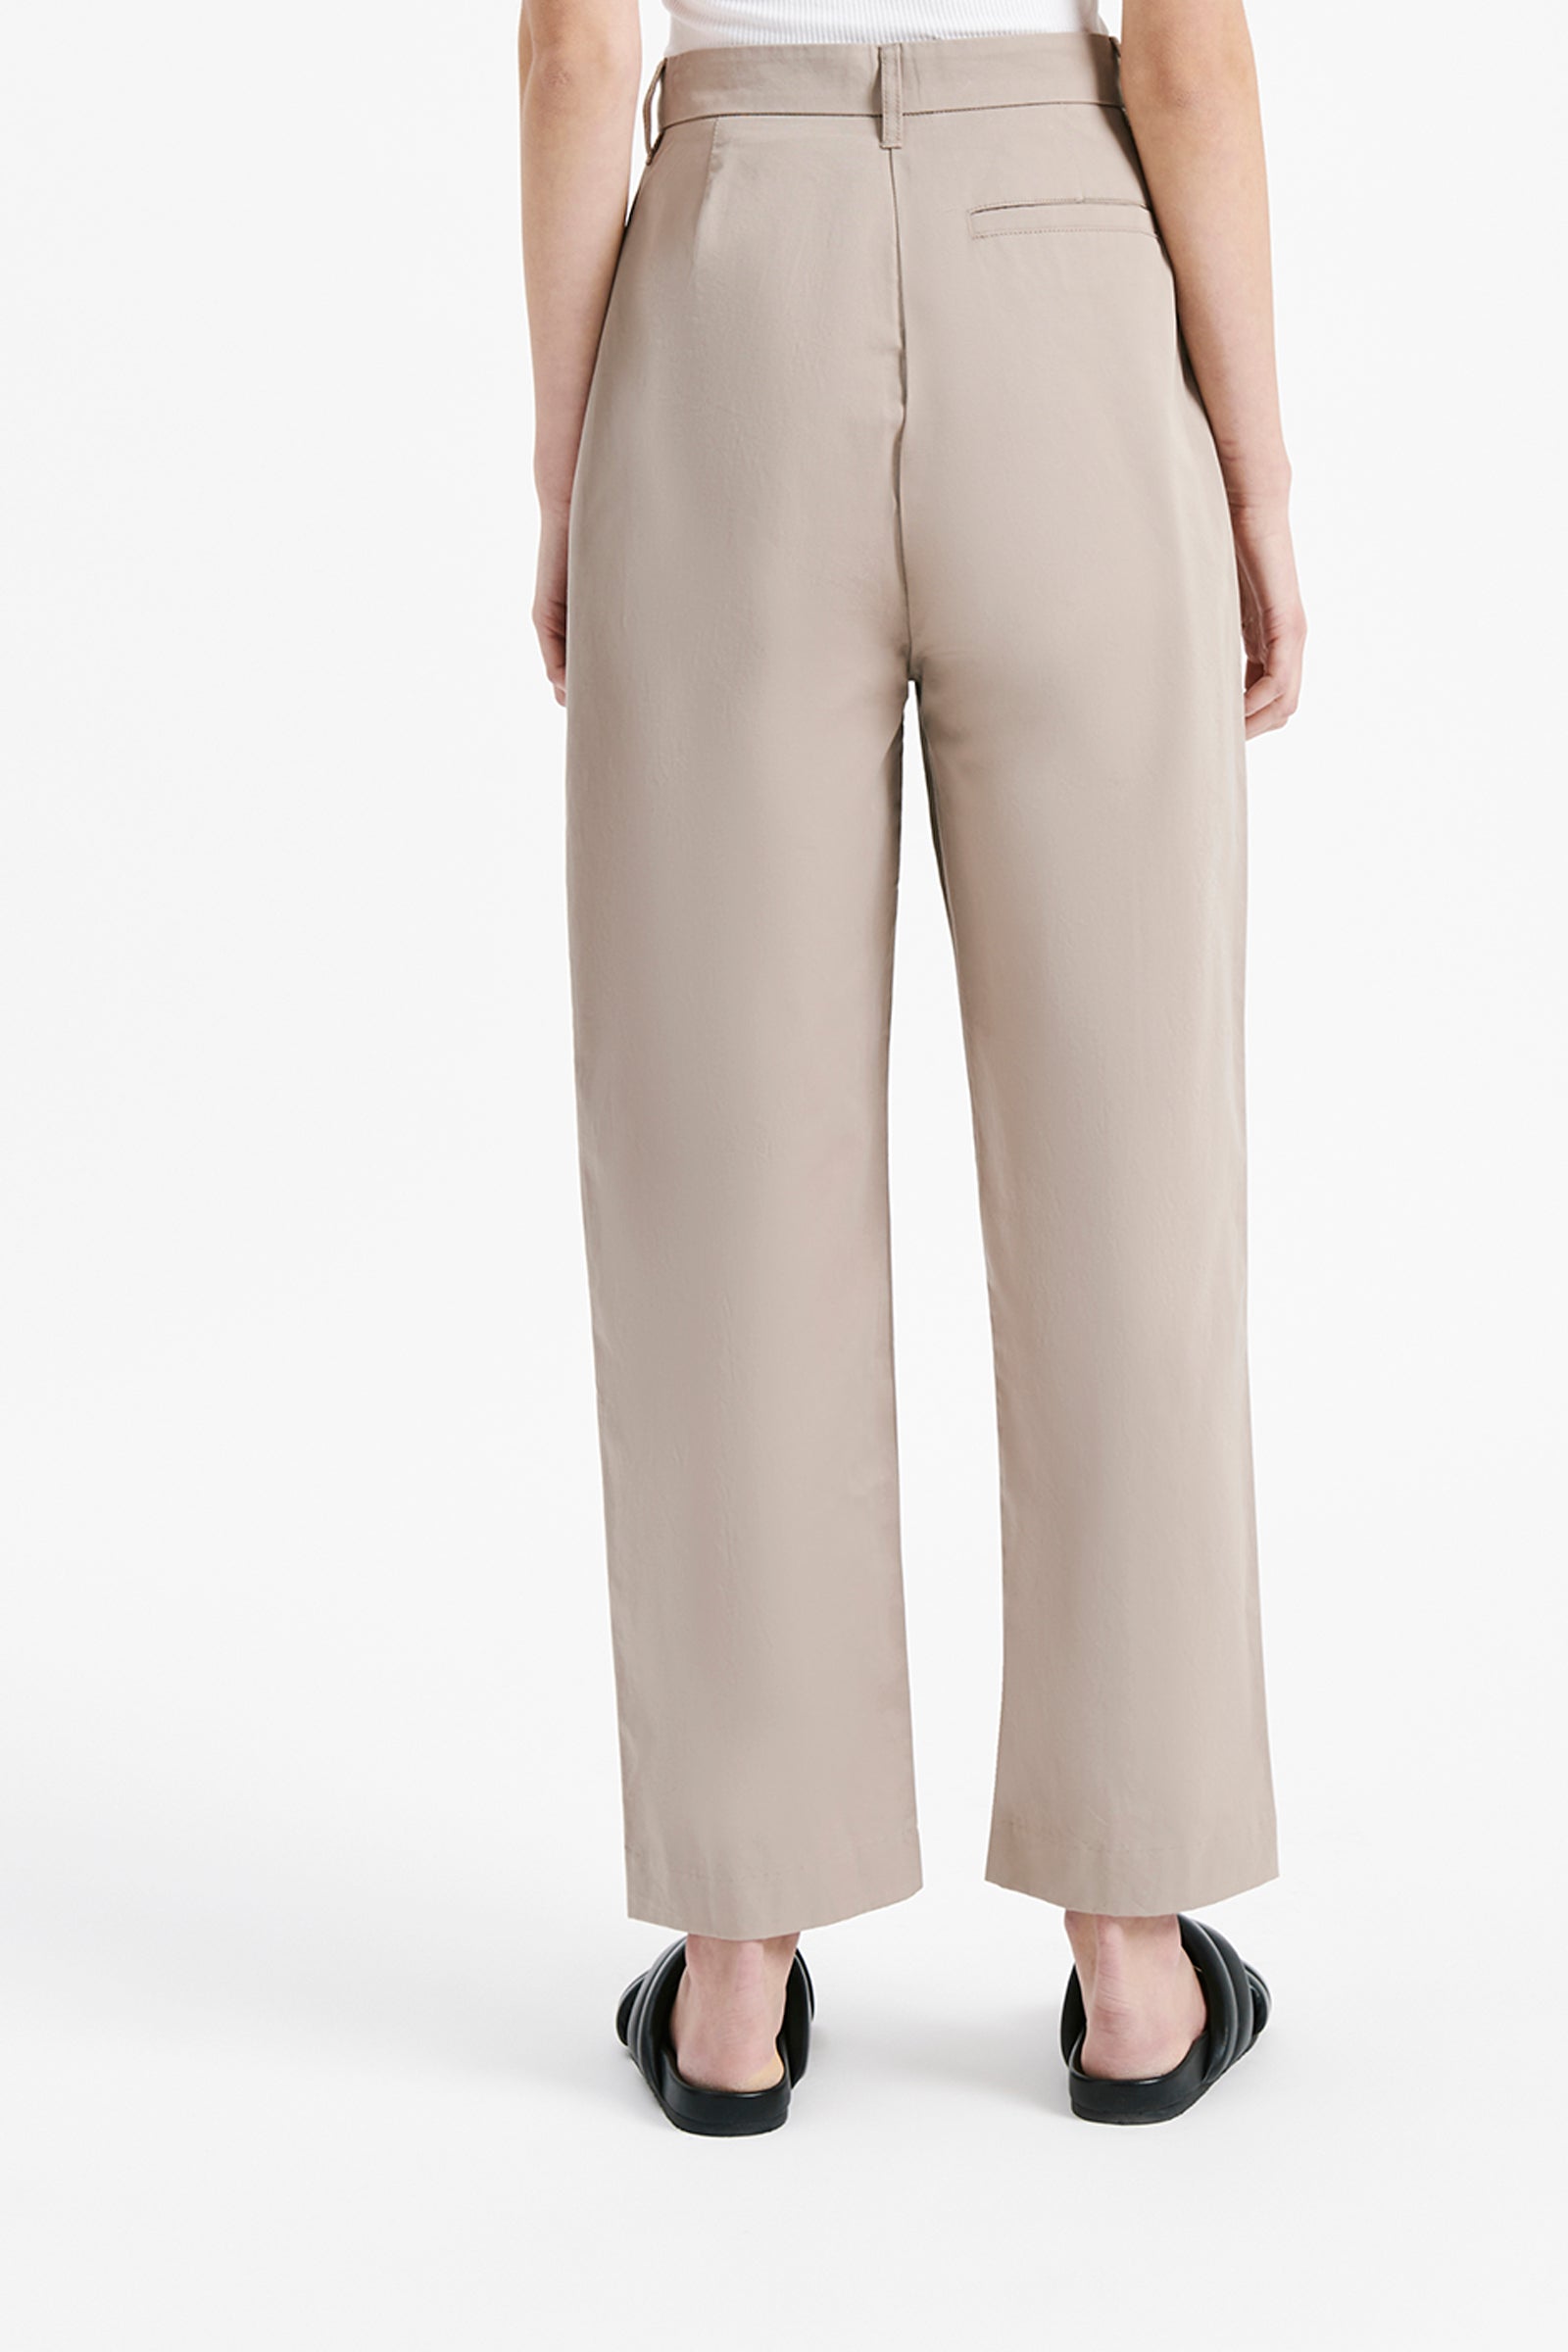 Nude Lucy Dune Pant in a Light Brown Mink Colour